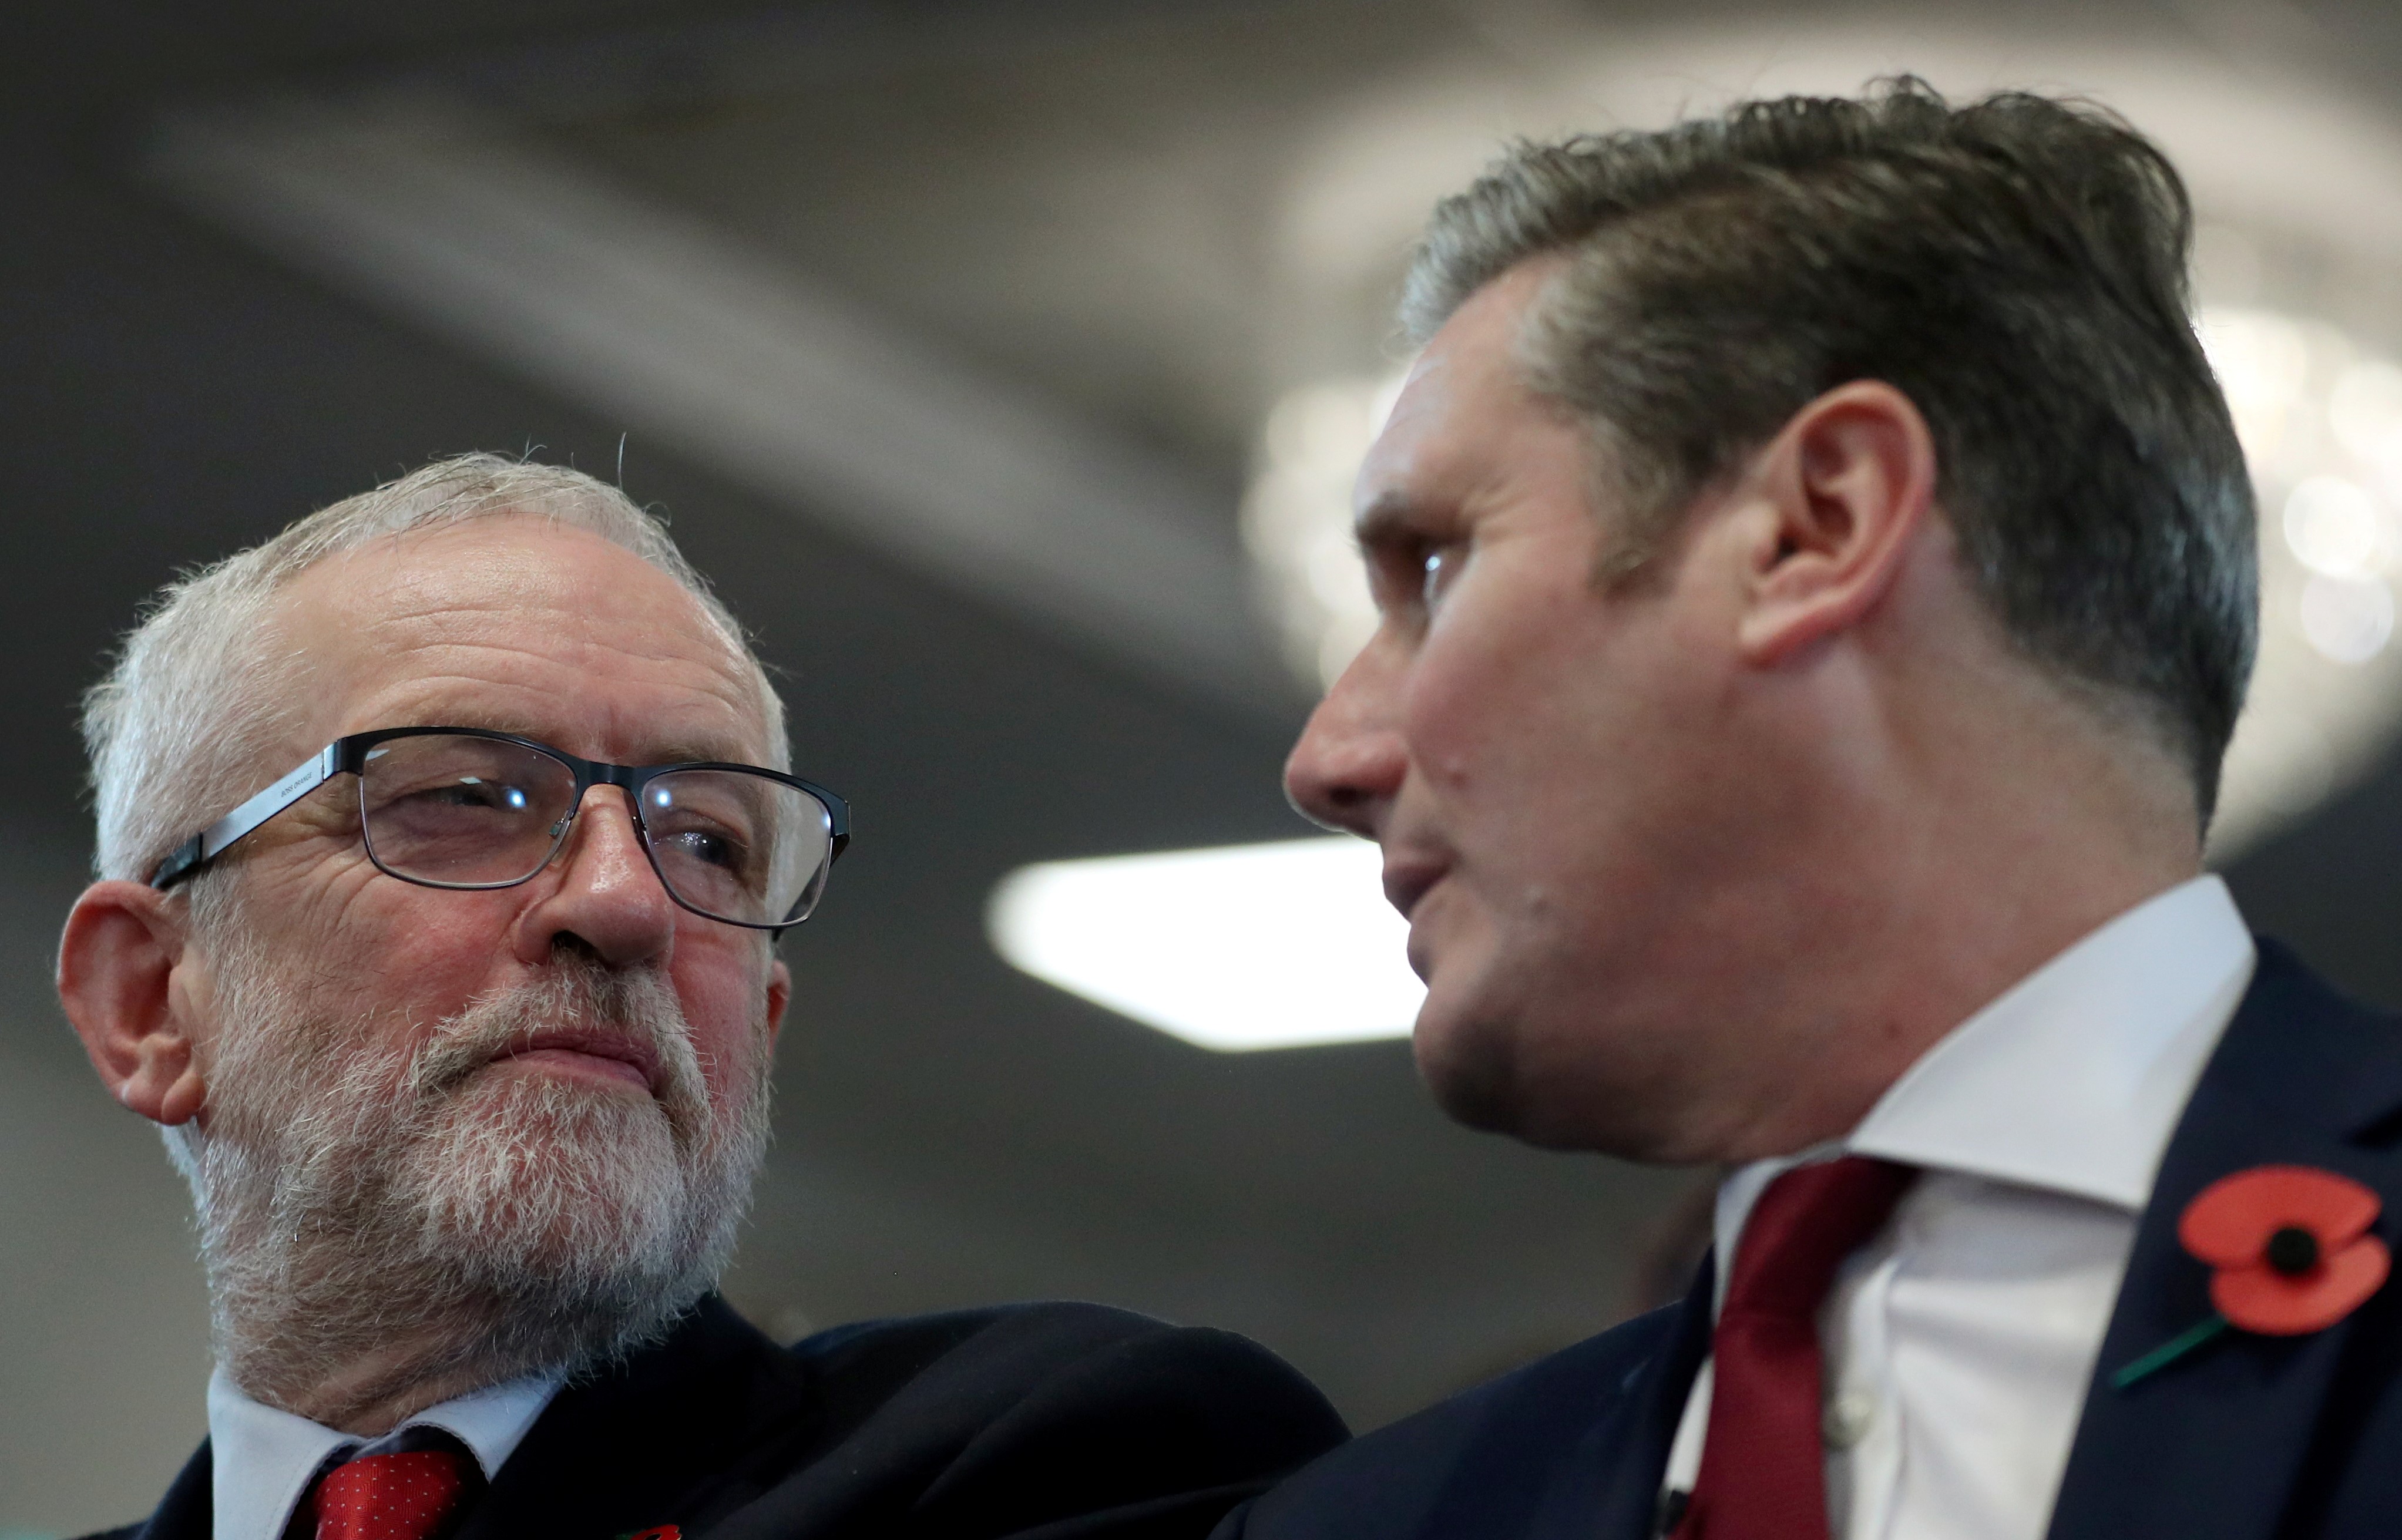 Then Britain's opposition Labour Party leader Jeremy Corbyn and Shadow Brexit Secretary Keir Starmer attend a general election campaign meeting in Harlow, Britain on 5 November, 2019 (Reuters)